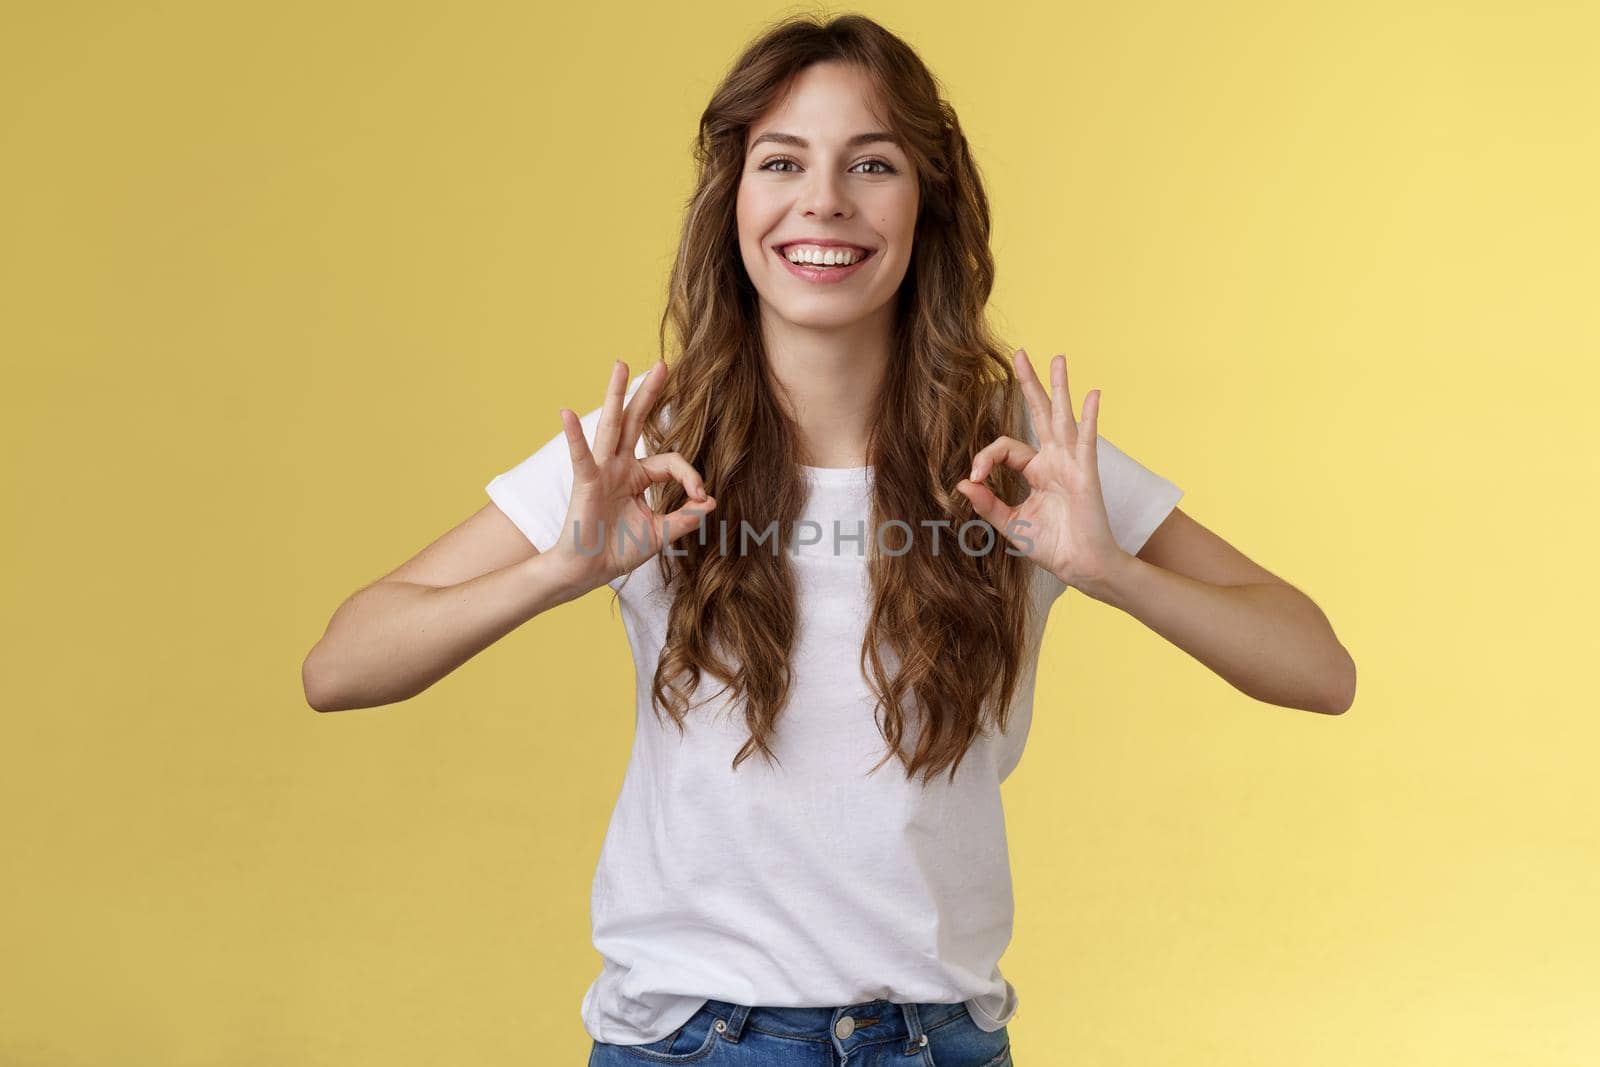 Deal I guarantee excellent results. Good-looking friendly pleasant young woman assure everything okay show ok perfect gesture smiling confident relaxed stand yellow background promise be good.